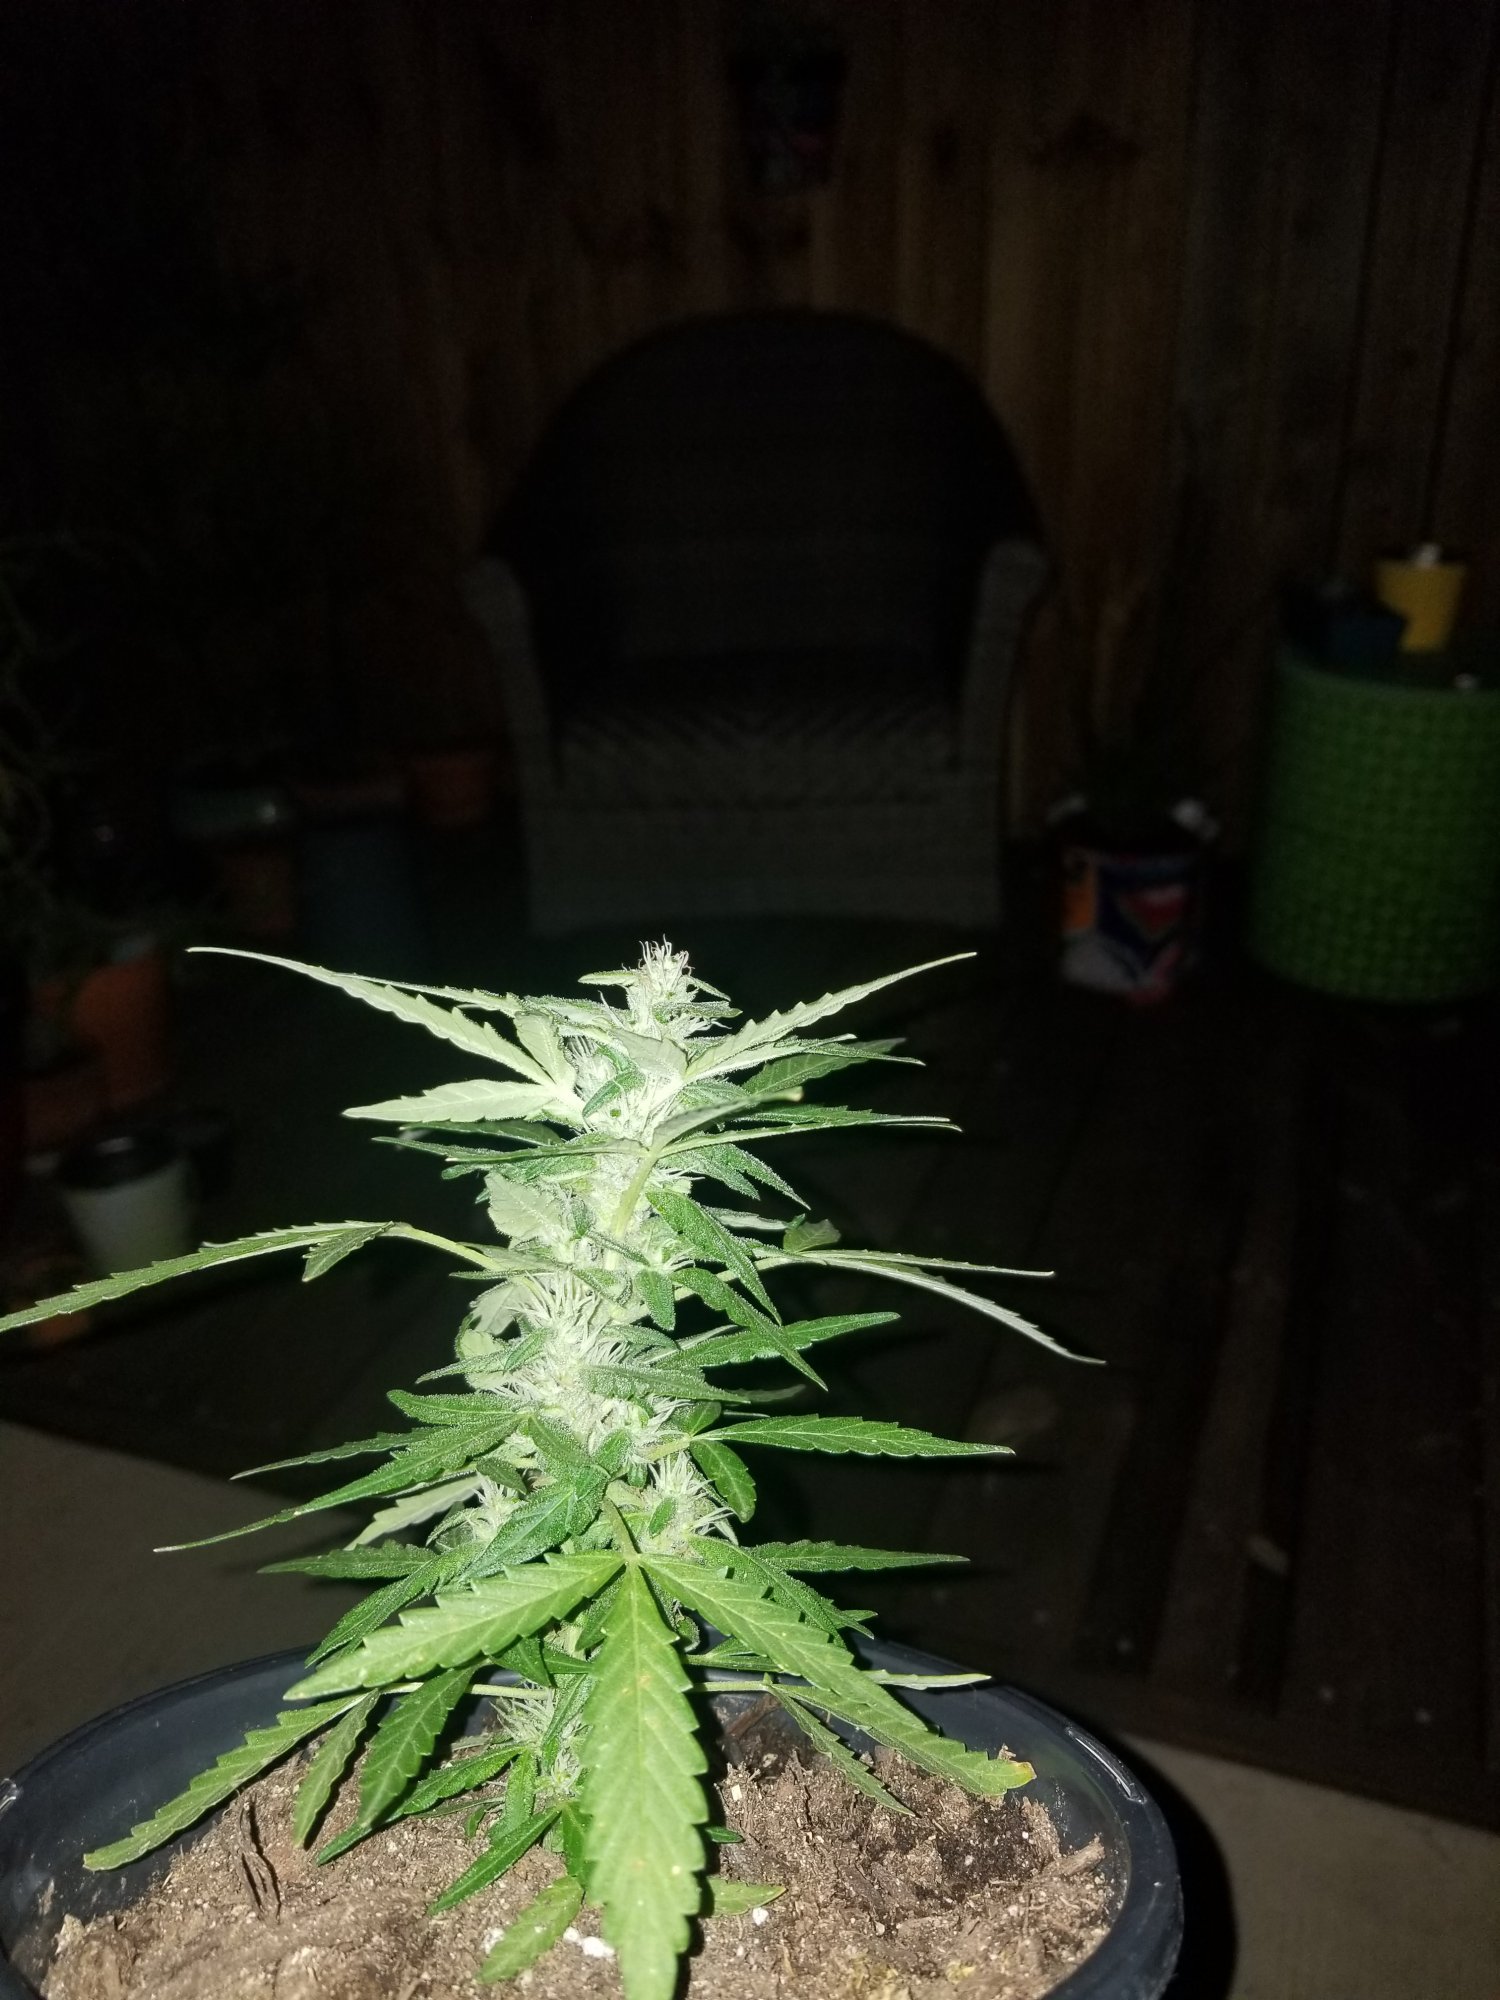 Is this right for 2 3 wks flower 5